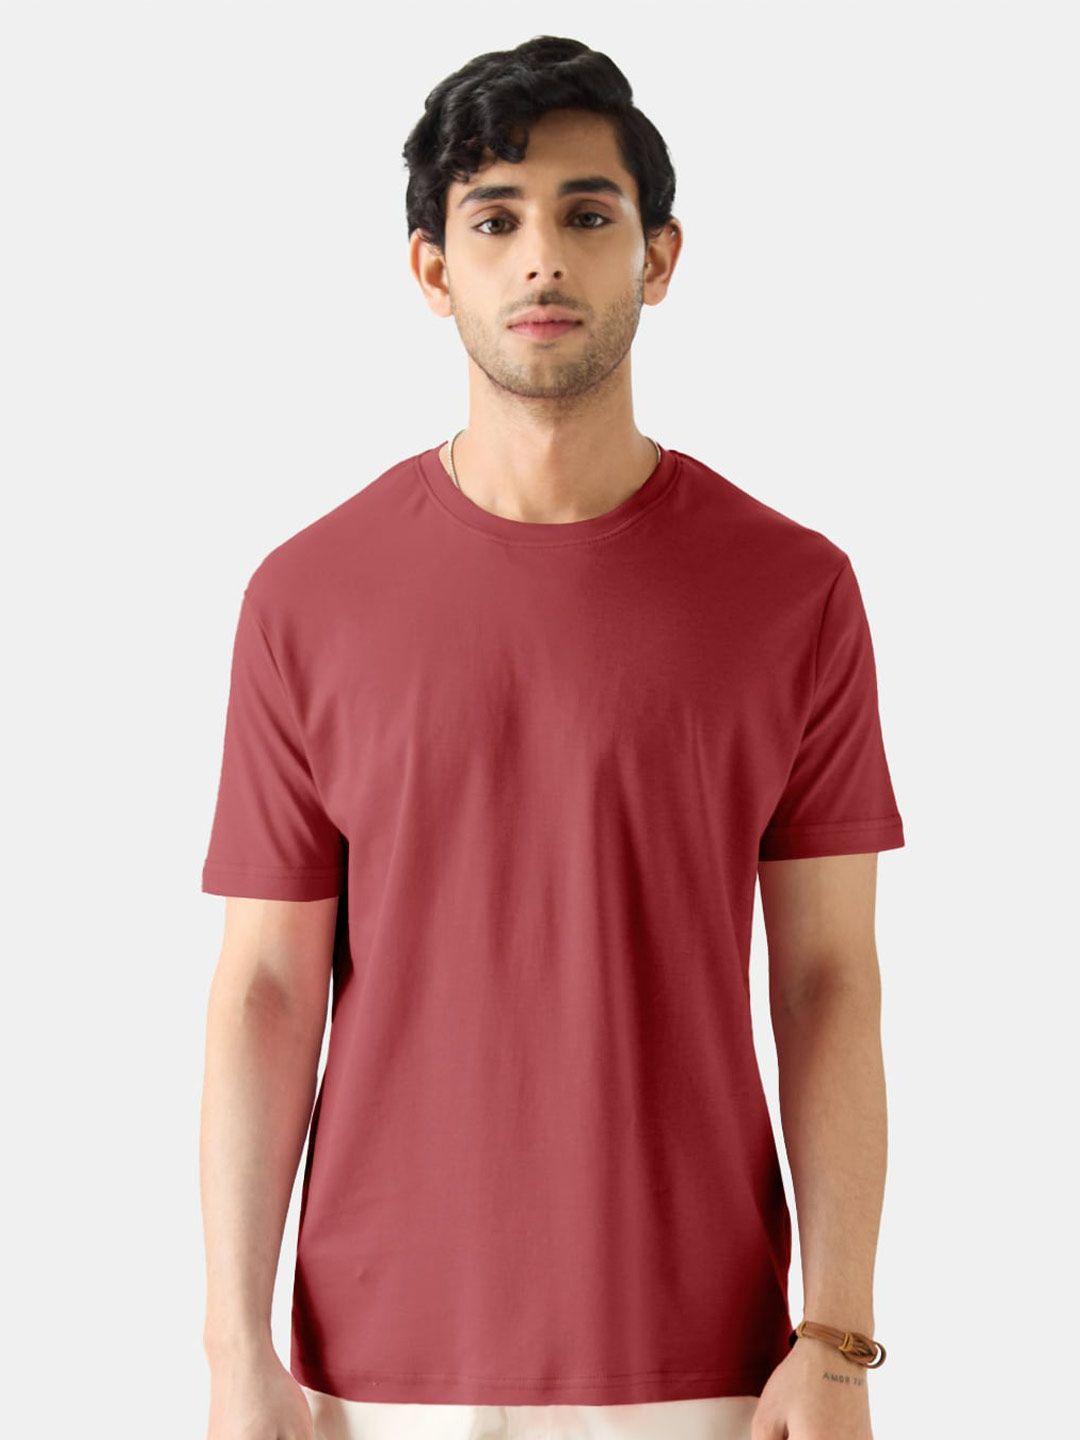 the souled store men red t-shirt